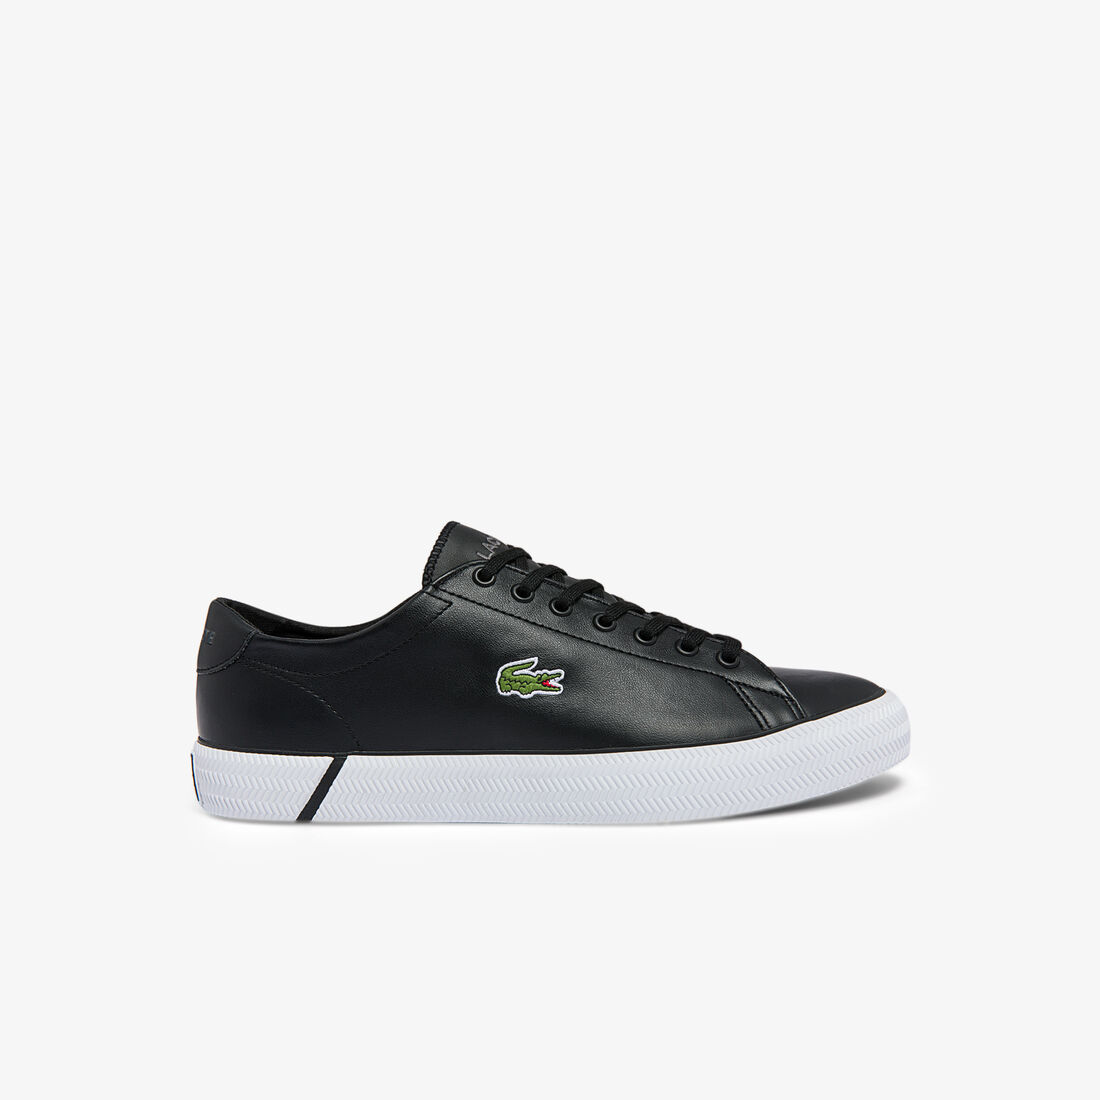 Men's Gripshot Leather and Synthetic Sneakers